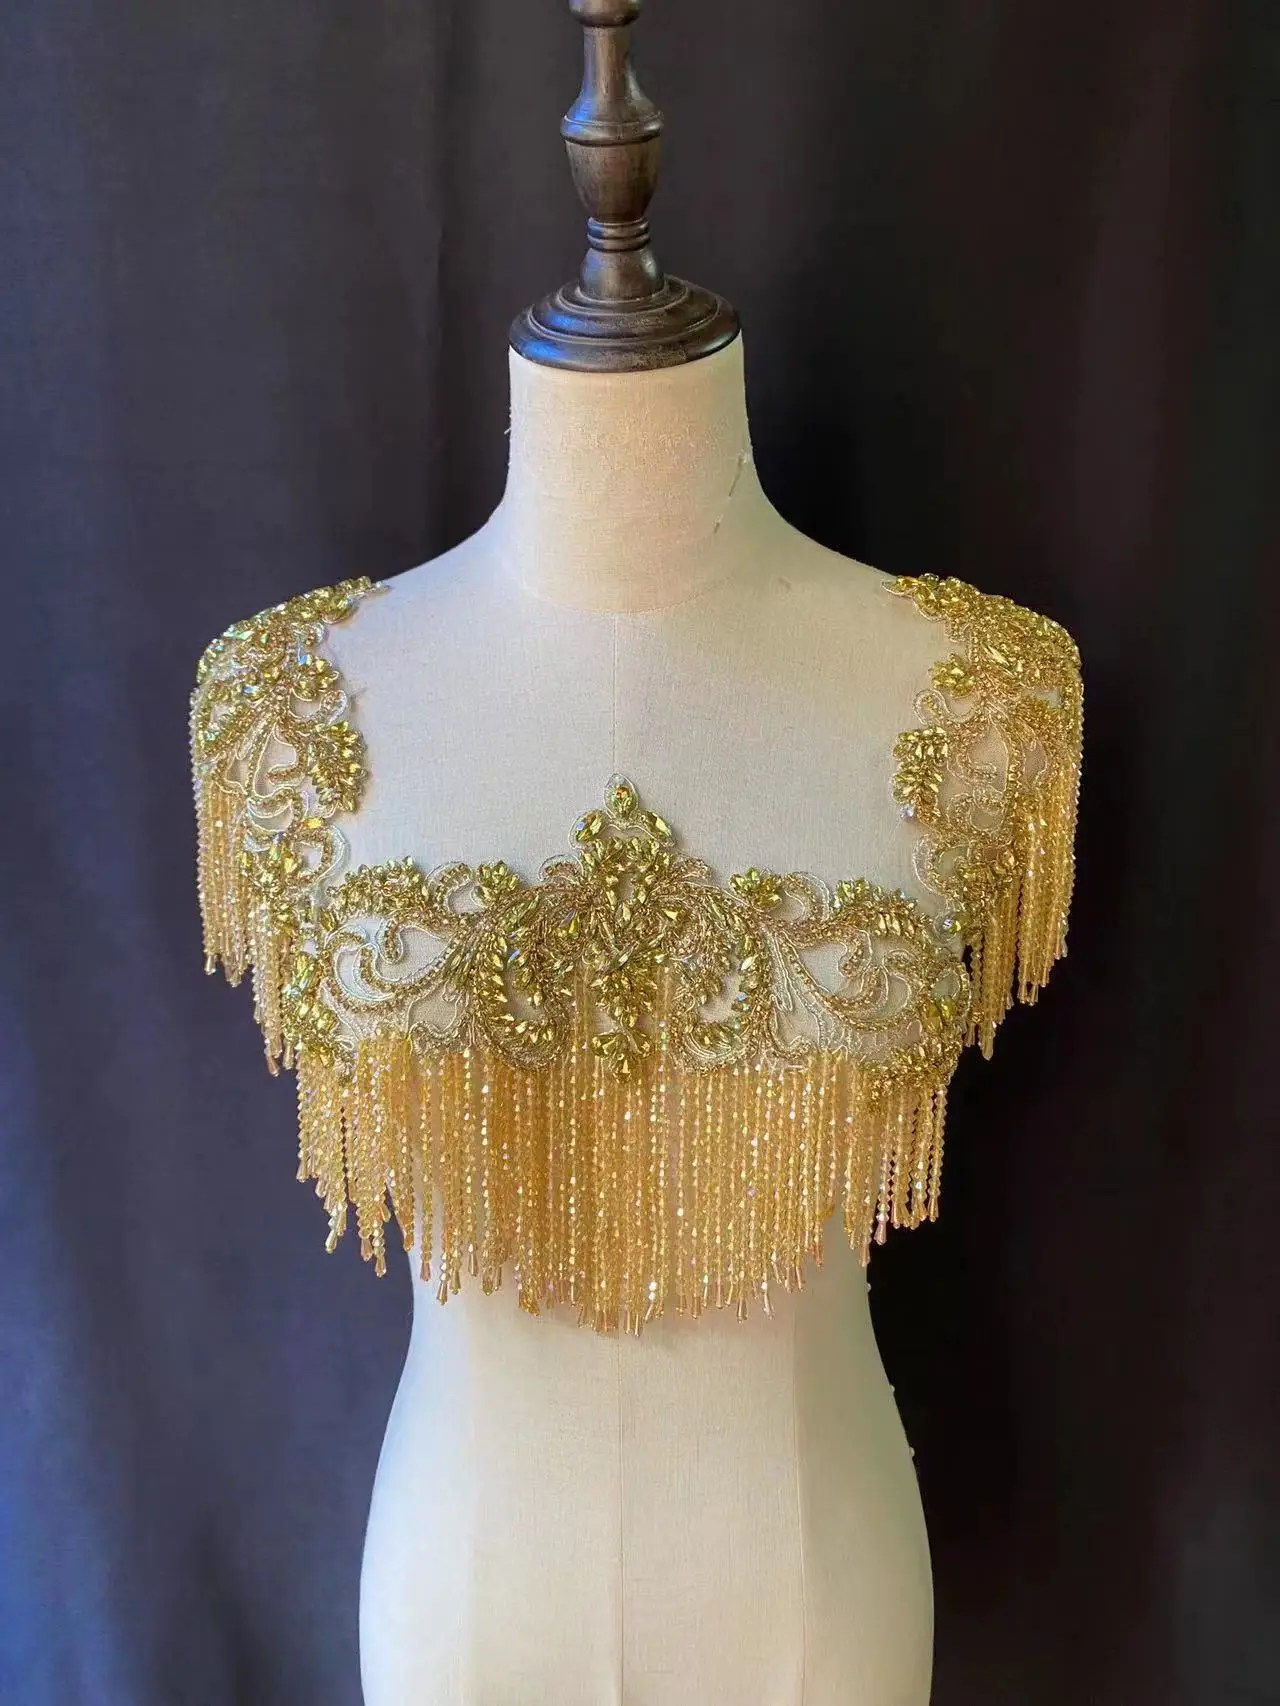 

Luxurious Gold Heavy Rhinestone Fringe Applique Crystal Diamond Beaded Chain Patch for Bridal Cape,Bling Necklace,Sash Sew on